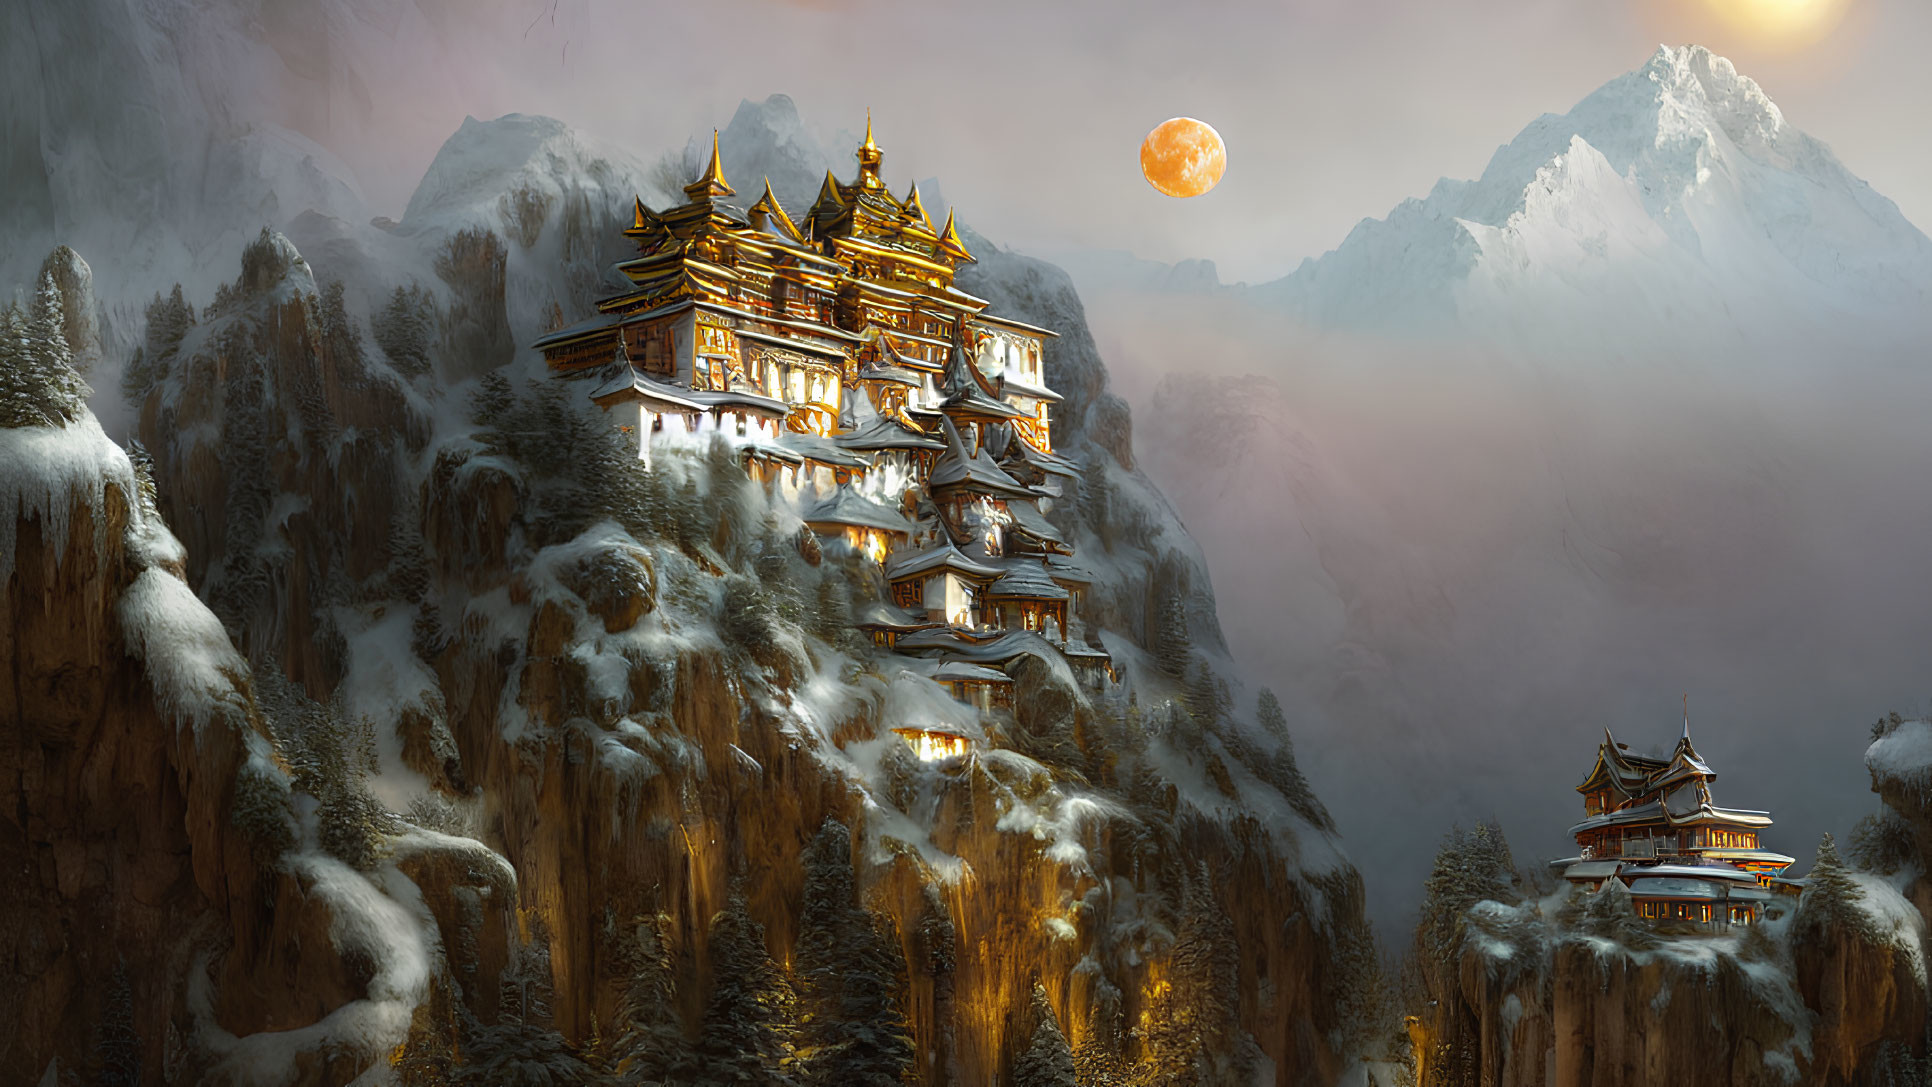 Twilight mountain landscape with temple, snowy trees, full moon